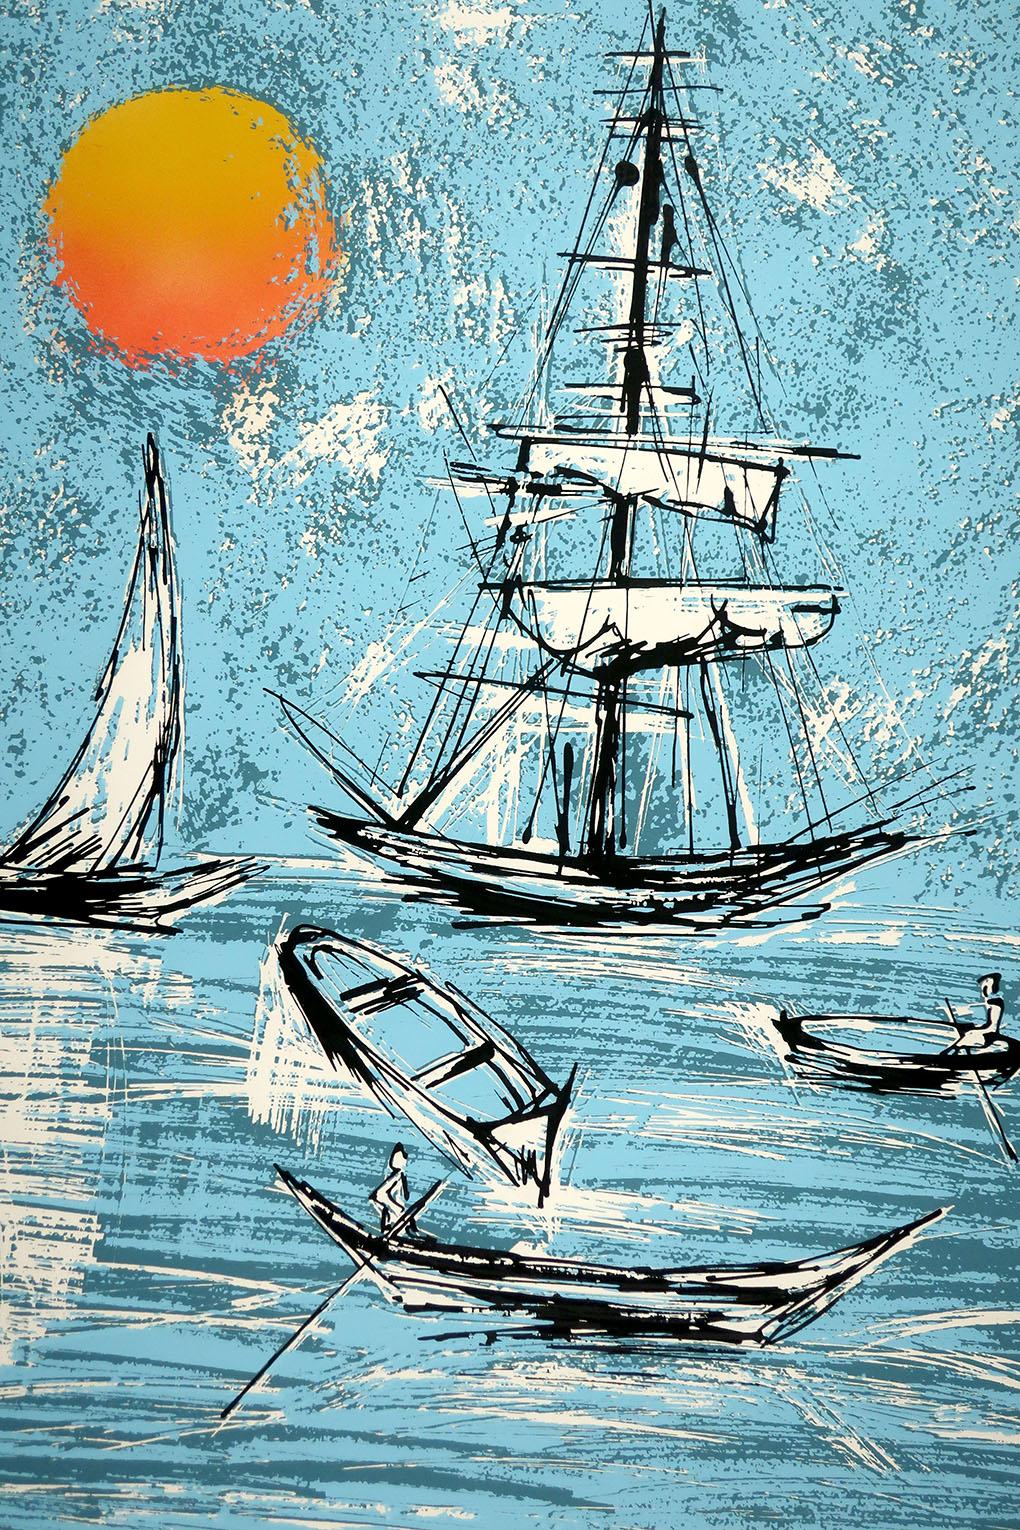 A vintage print of a sunny sailing scene printed in bright blues and oranges. The artist embraced the medium of the print and used the distortions of the printing process to bring energy and life to the composition. The print is hand signed &